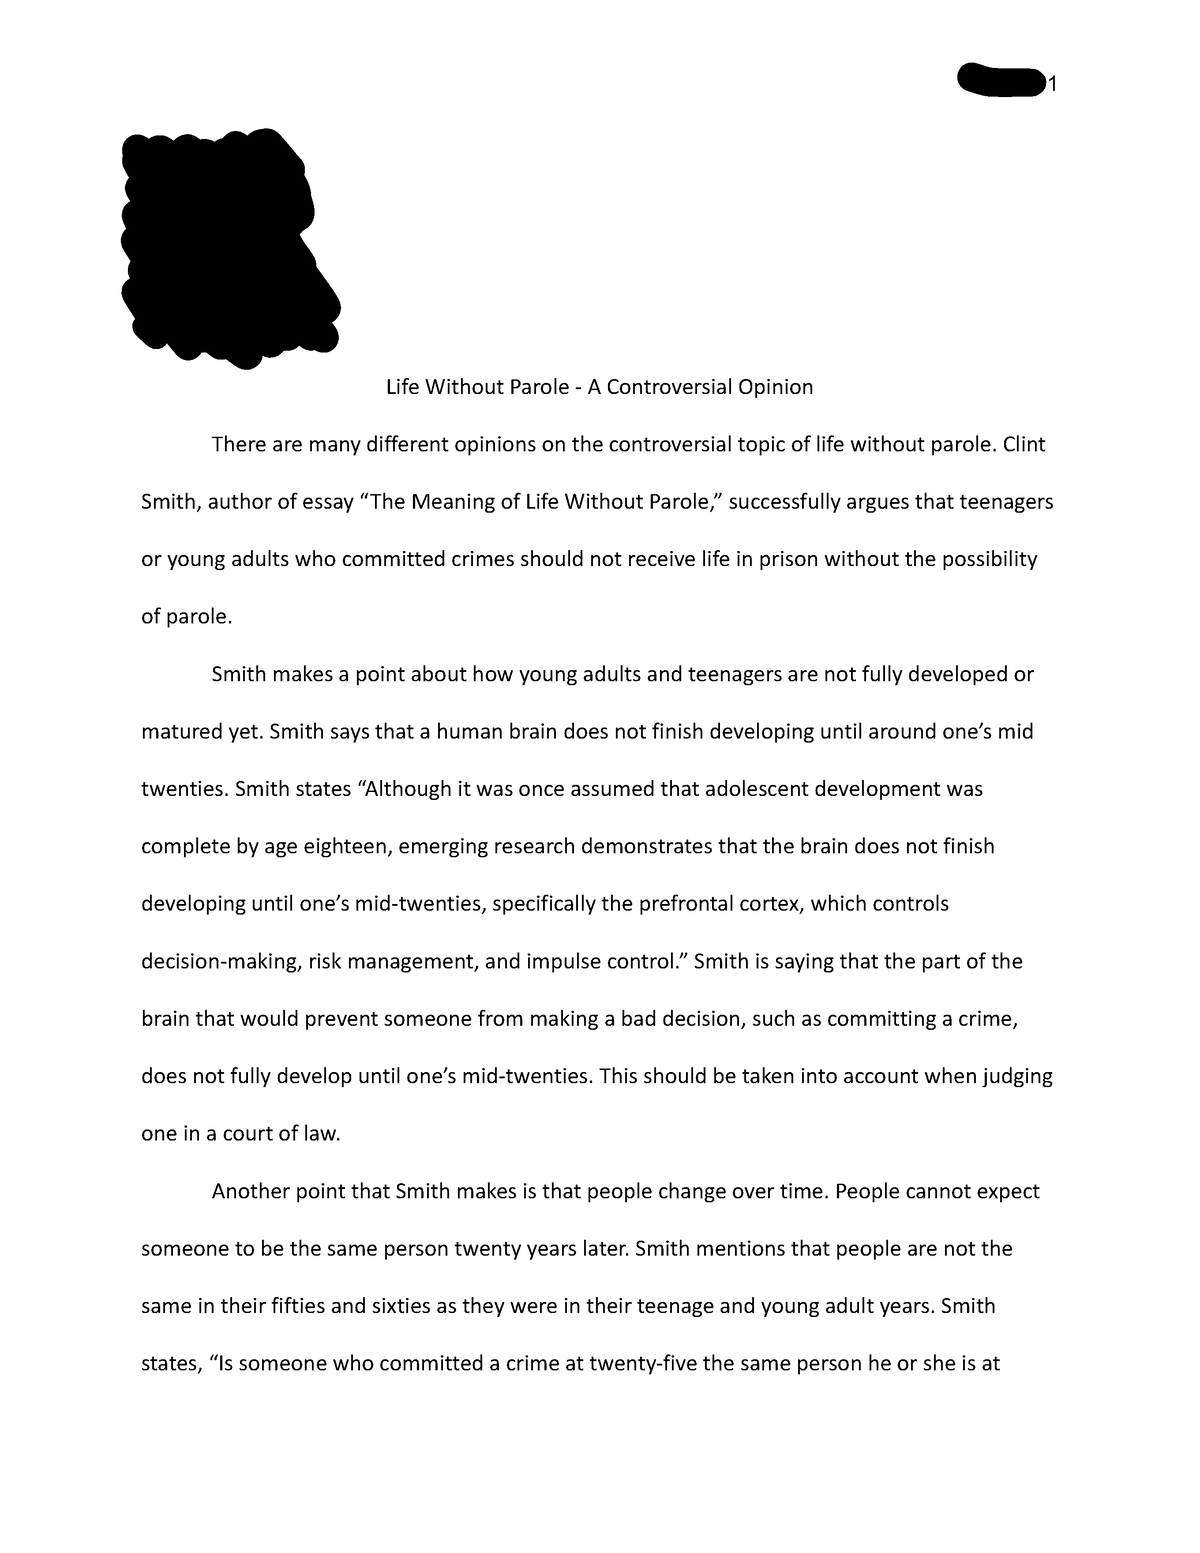 the meaning of life without parole essay